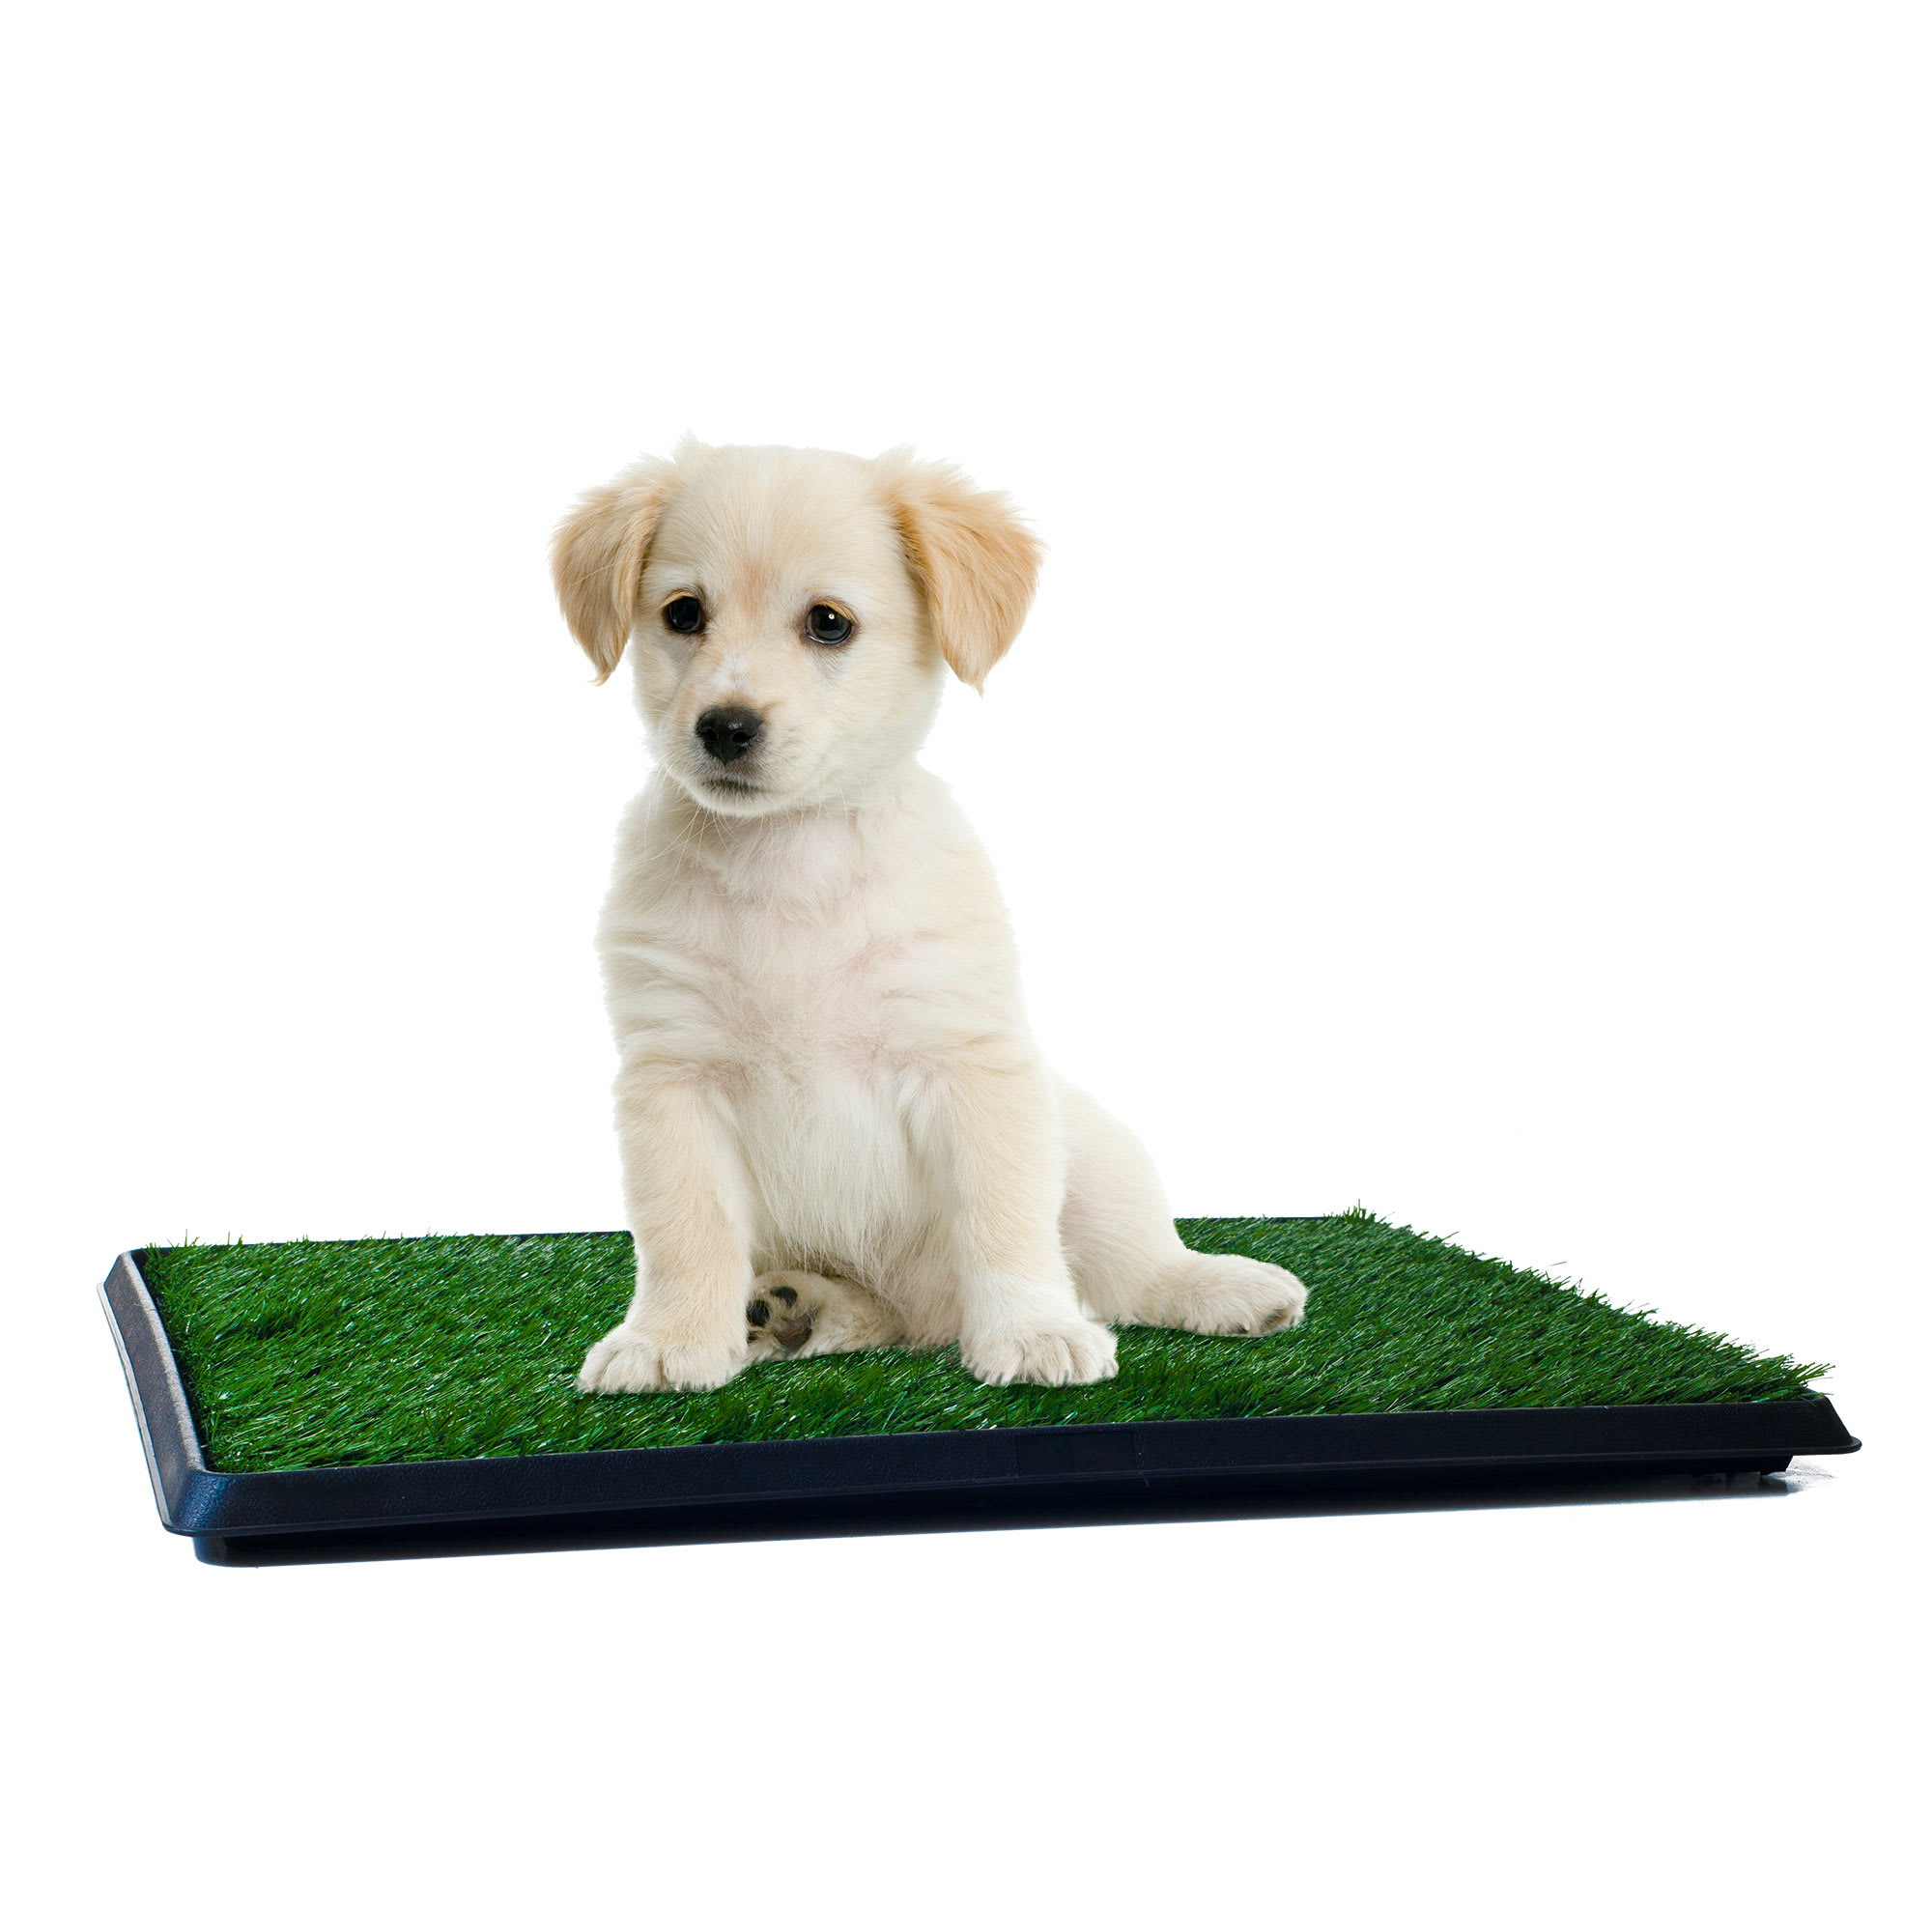 Pee Pad Holder for Small Dogs Indoor Potty Training Tray for Little Puppy  or Cat Litter Mat Only(Very Small)